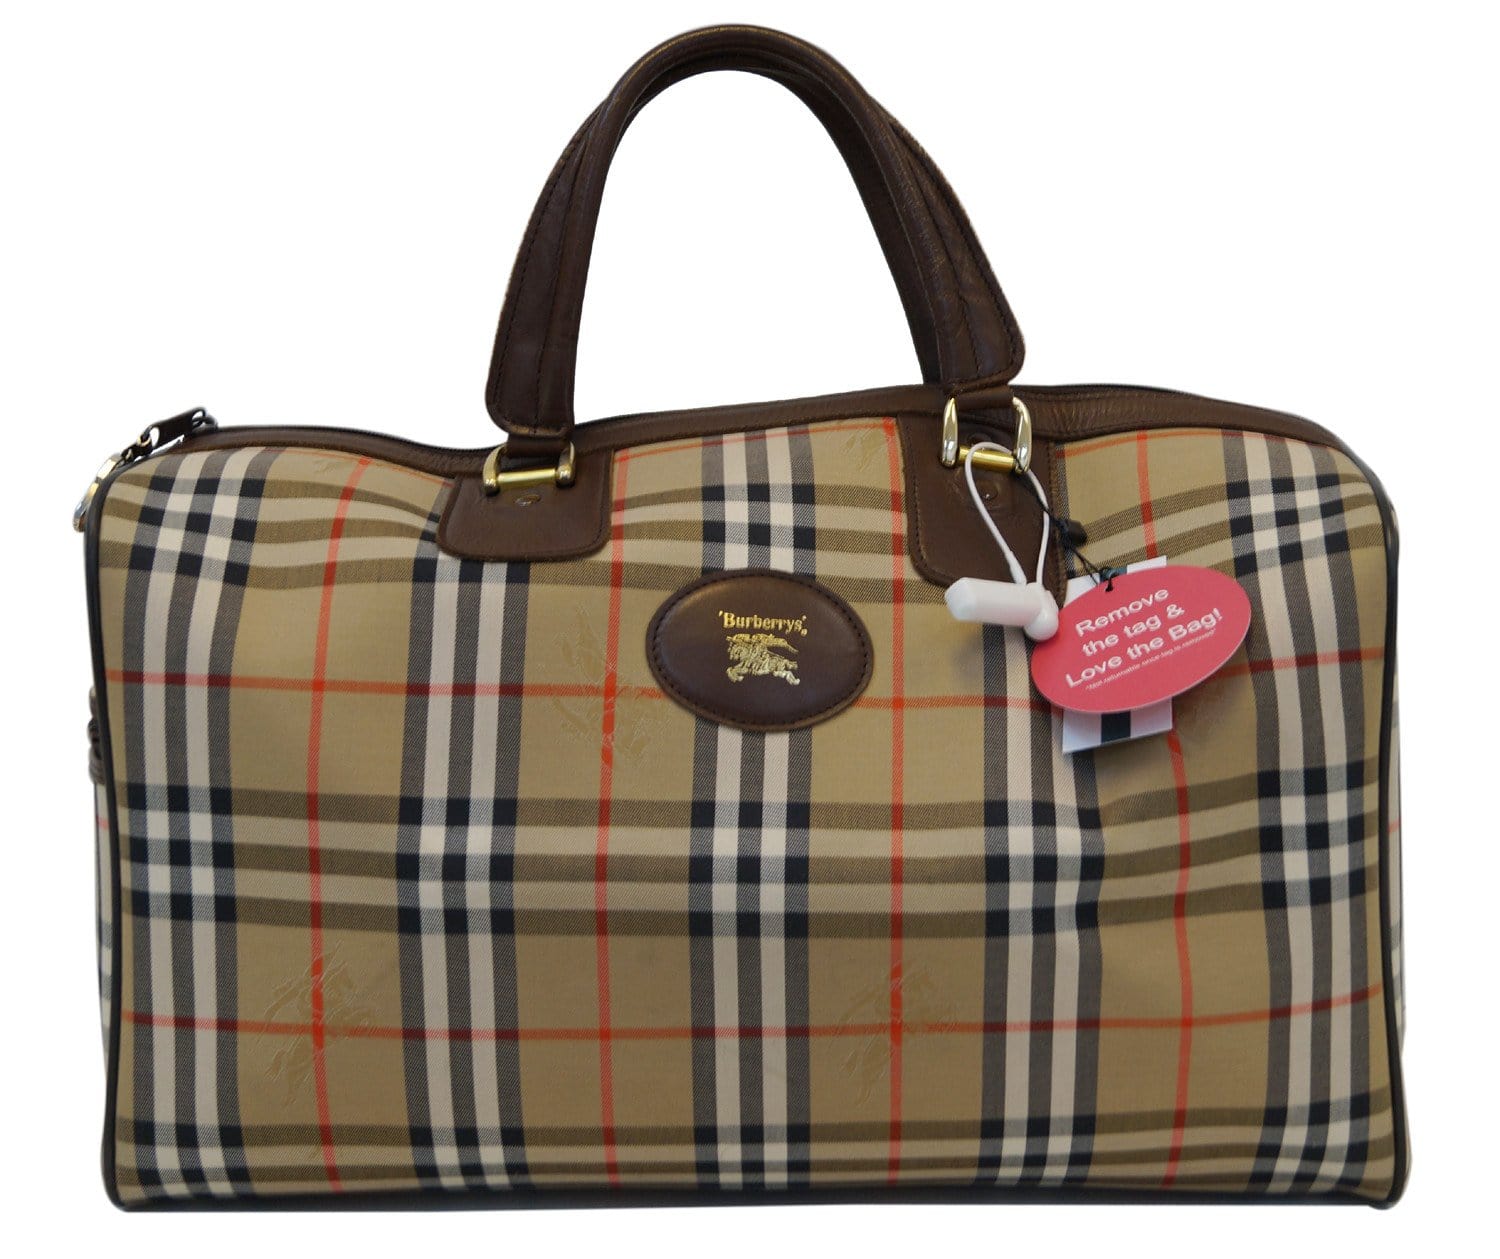 Travel Bag Burberry Italy, SAVE 54% 